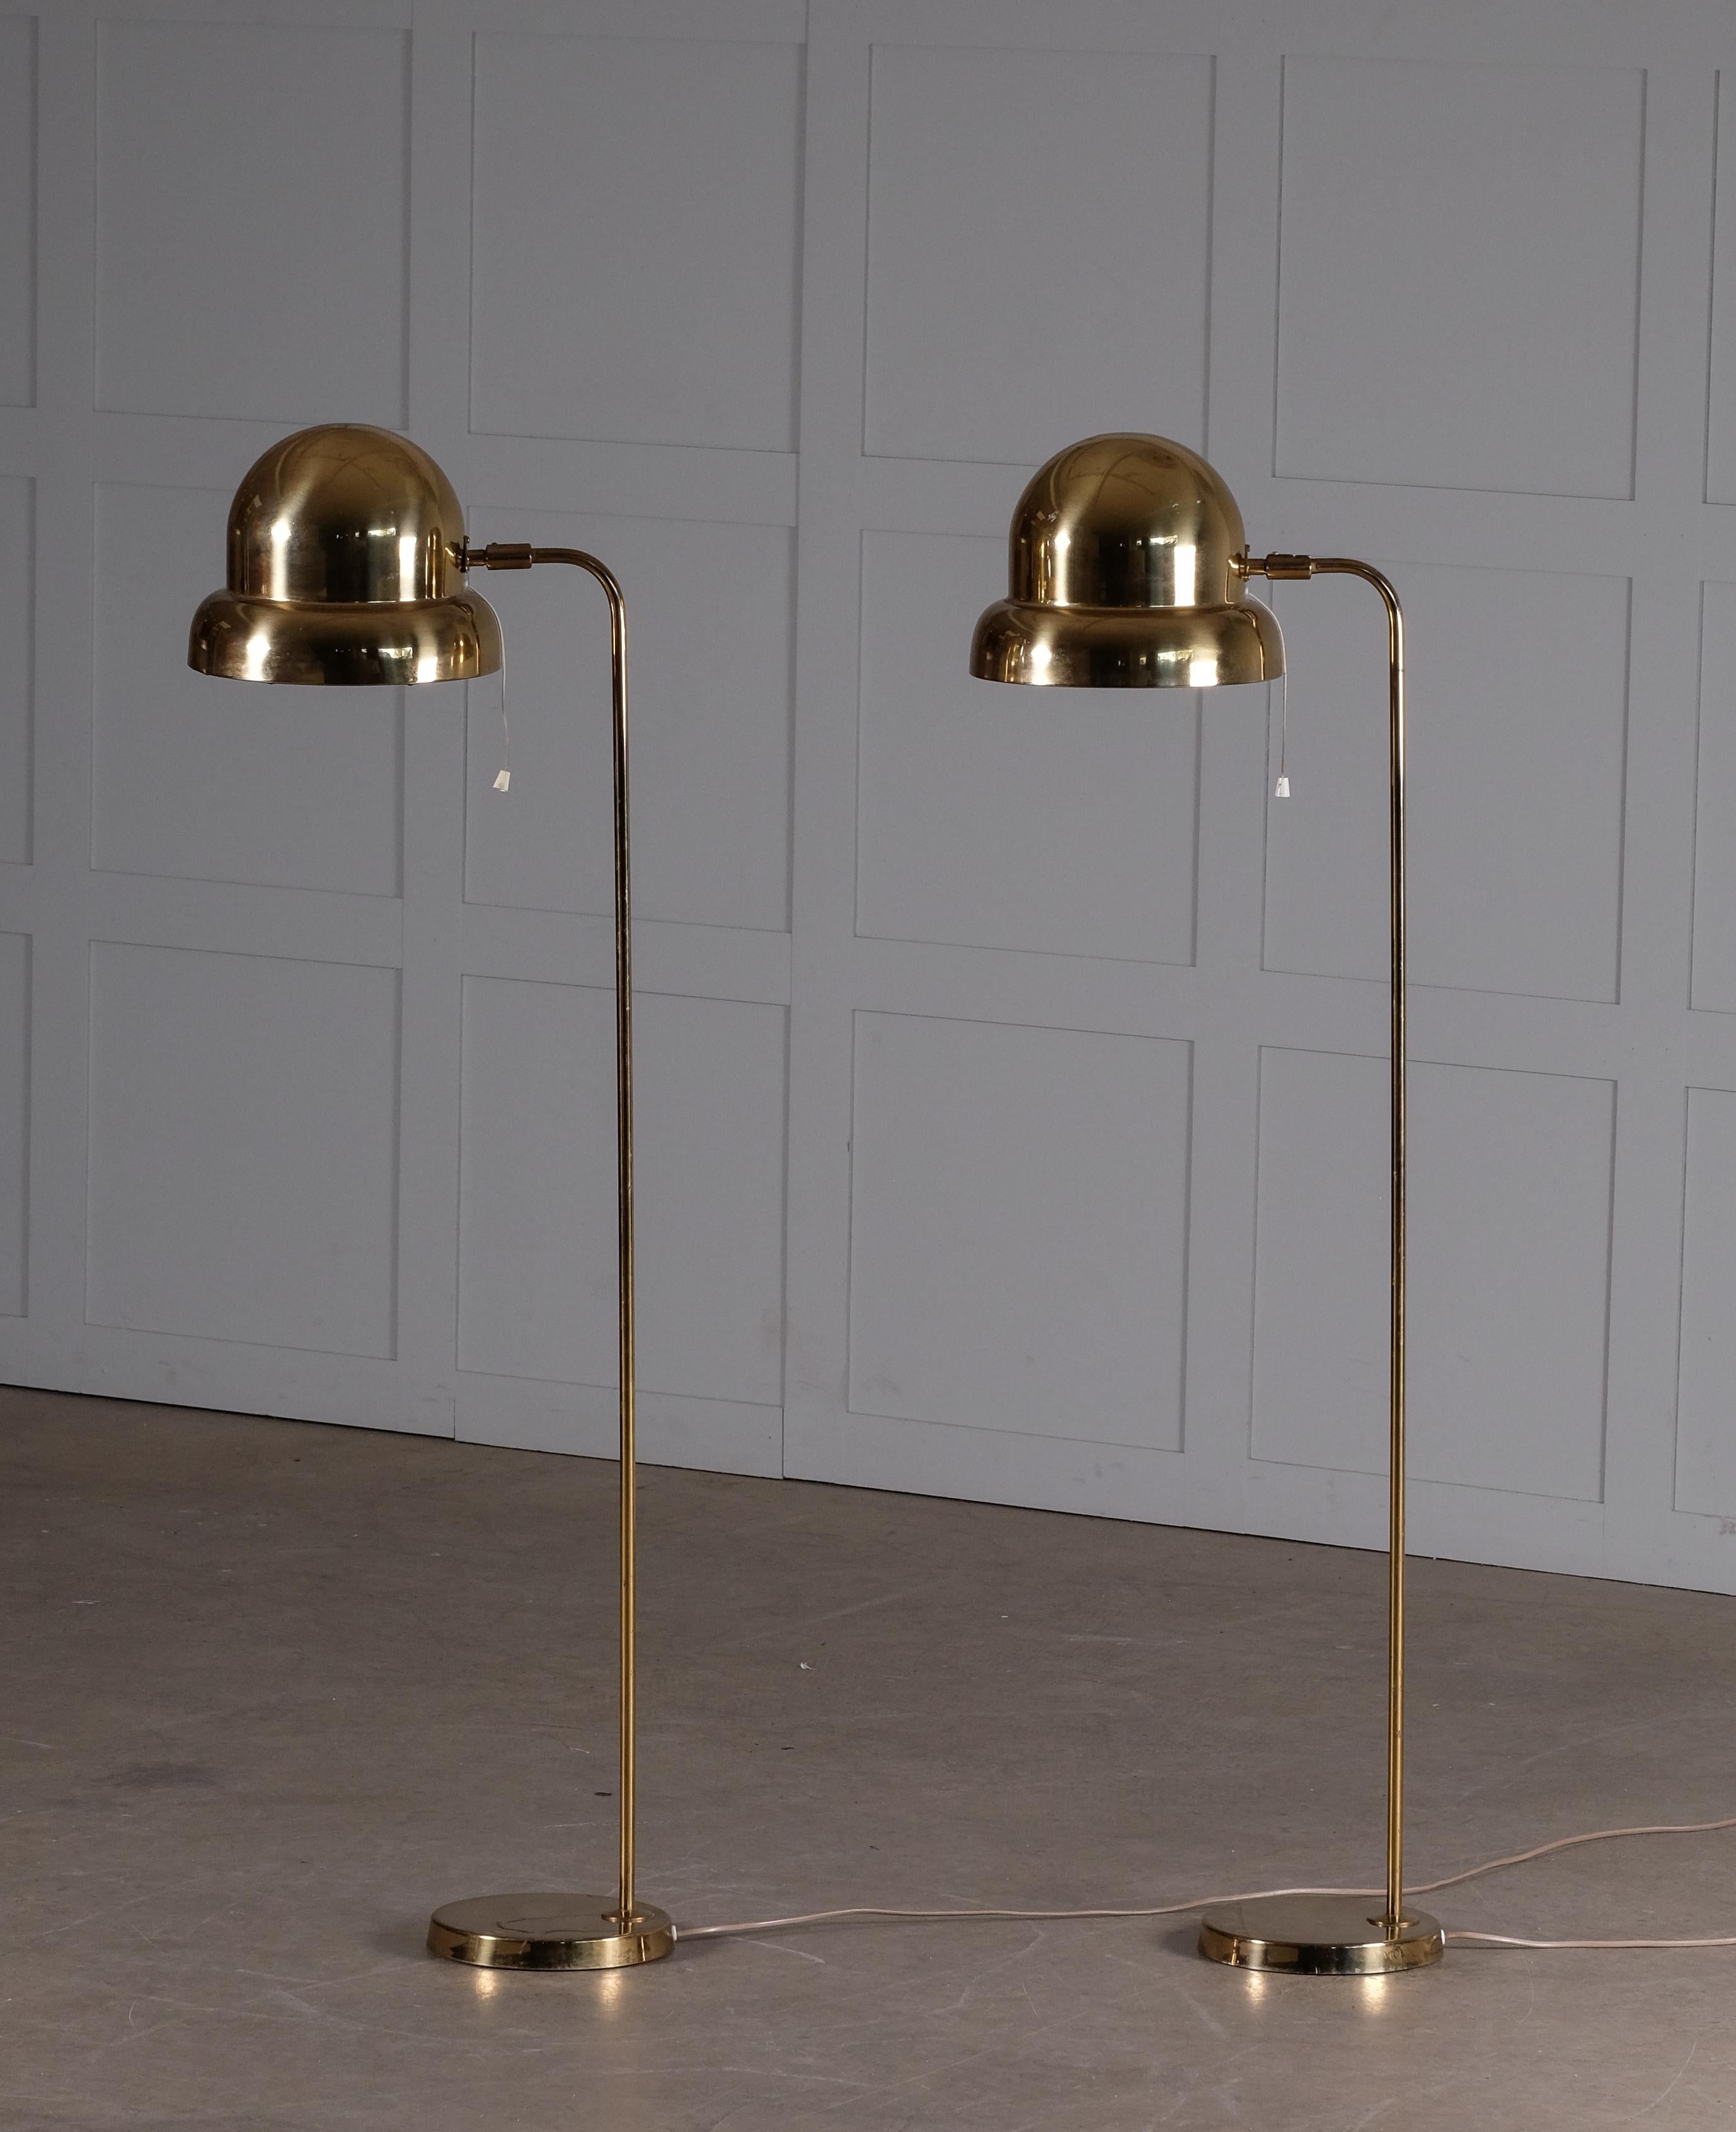 Brass Pair of Floor Lamps Model G-120M by Bergboms, Sweden, 1960s For Sale